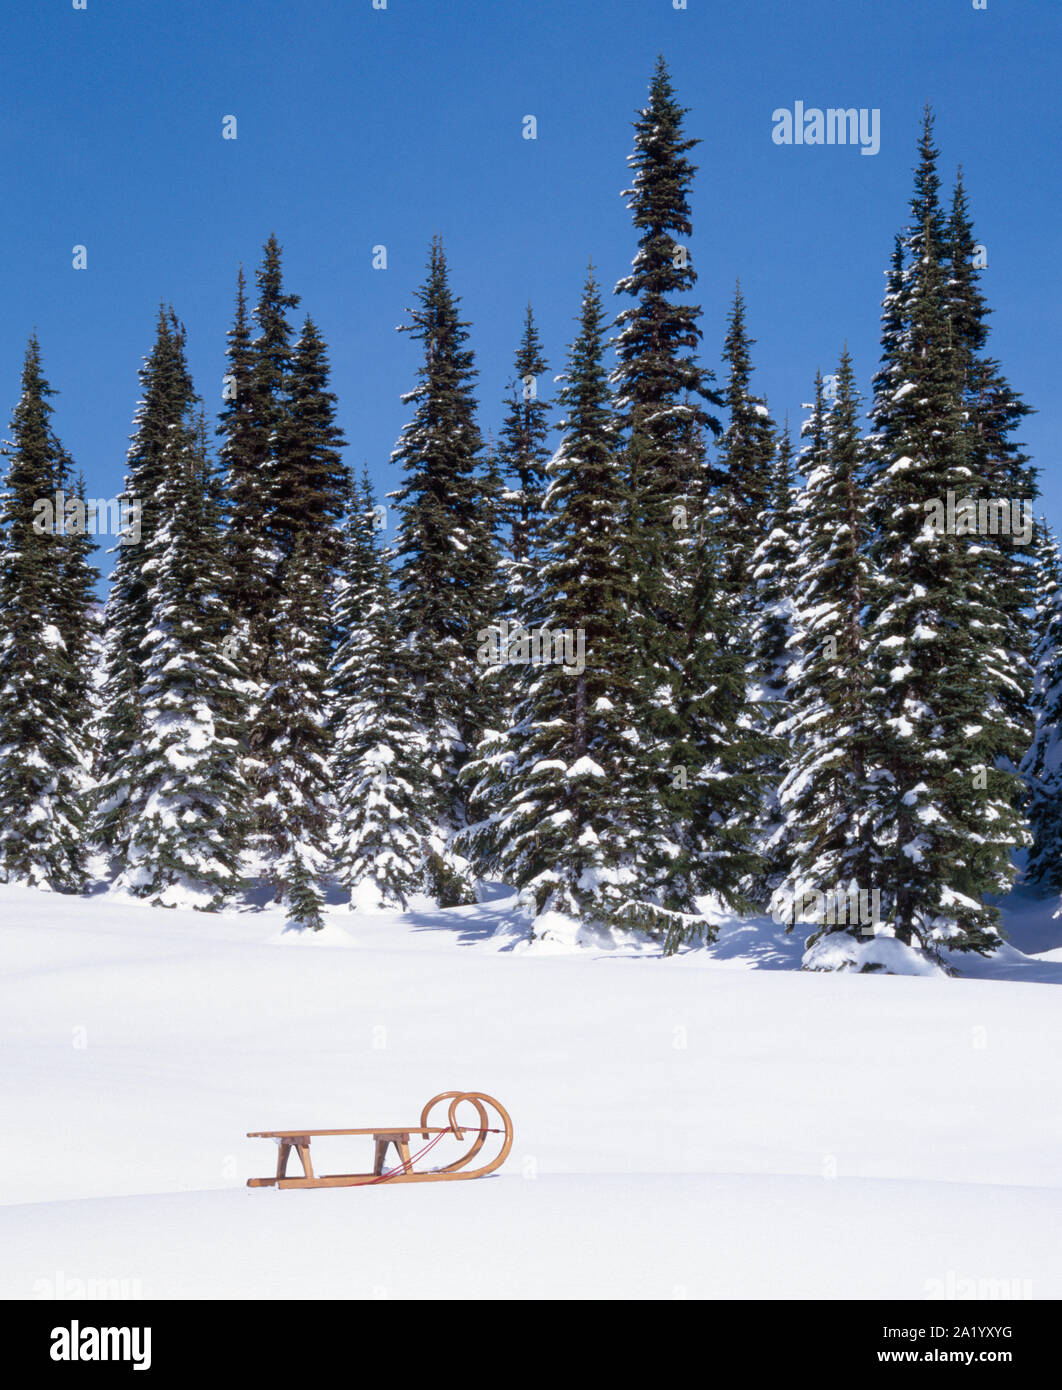 Wooden sled in snowy winter landscape with evergreen fir pine trees background Stock Photo